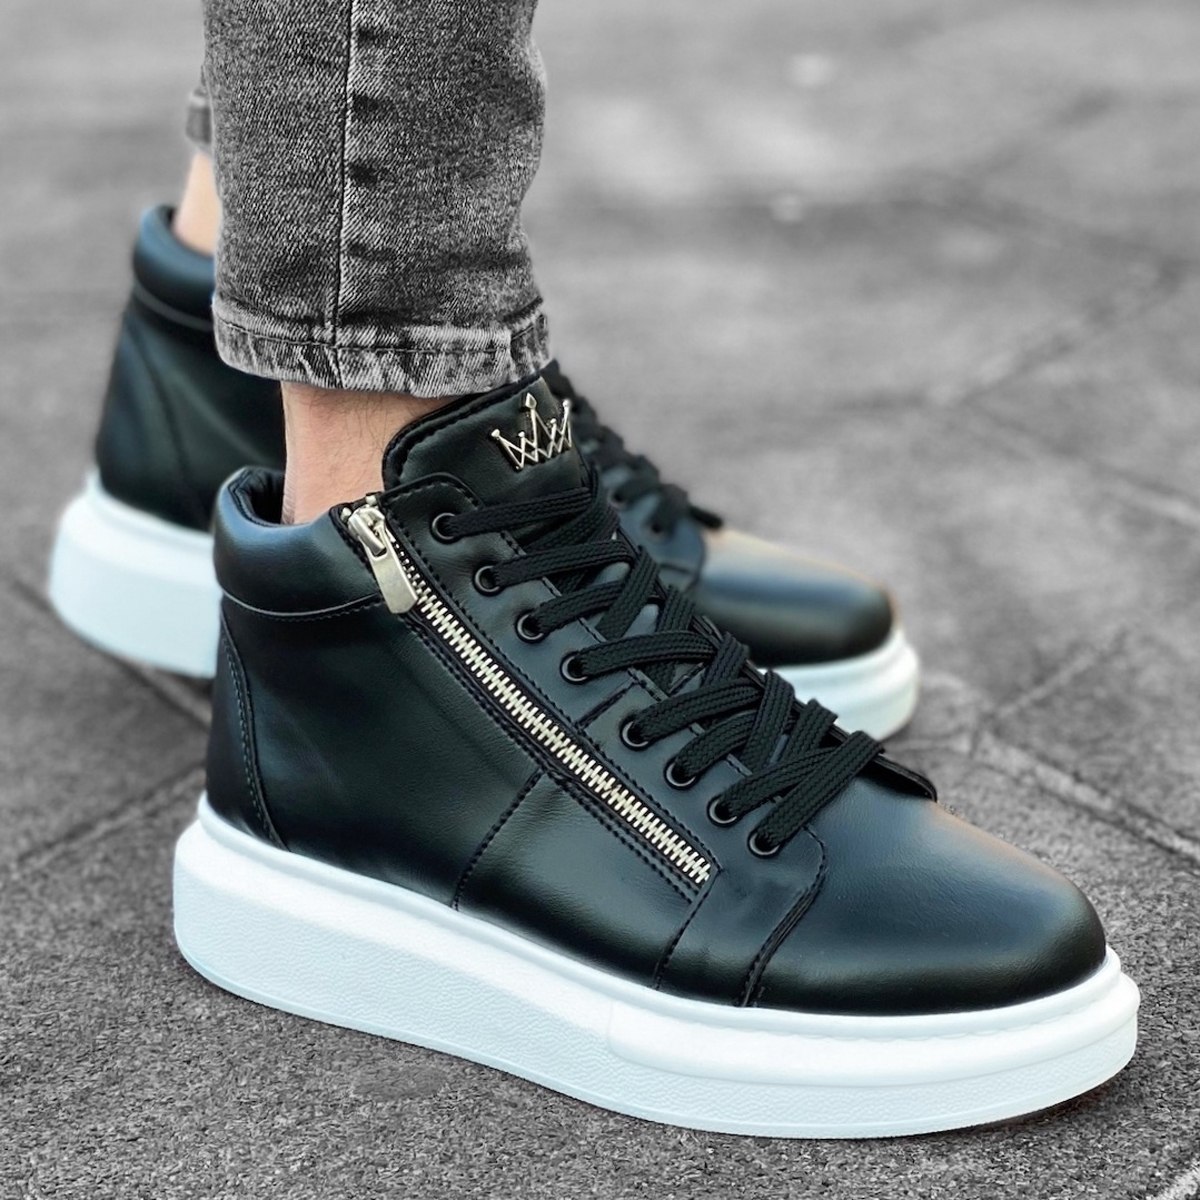 Men's High Top Sneakers Shoes Mens Shoes Sneakers & Athletic Shoes Hi Tops 